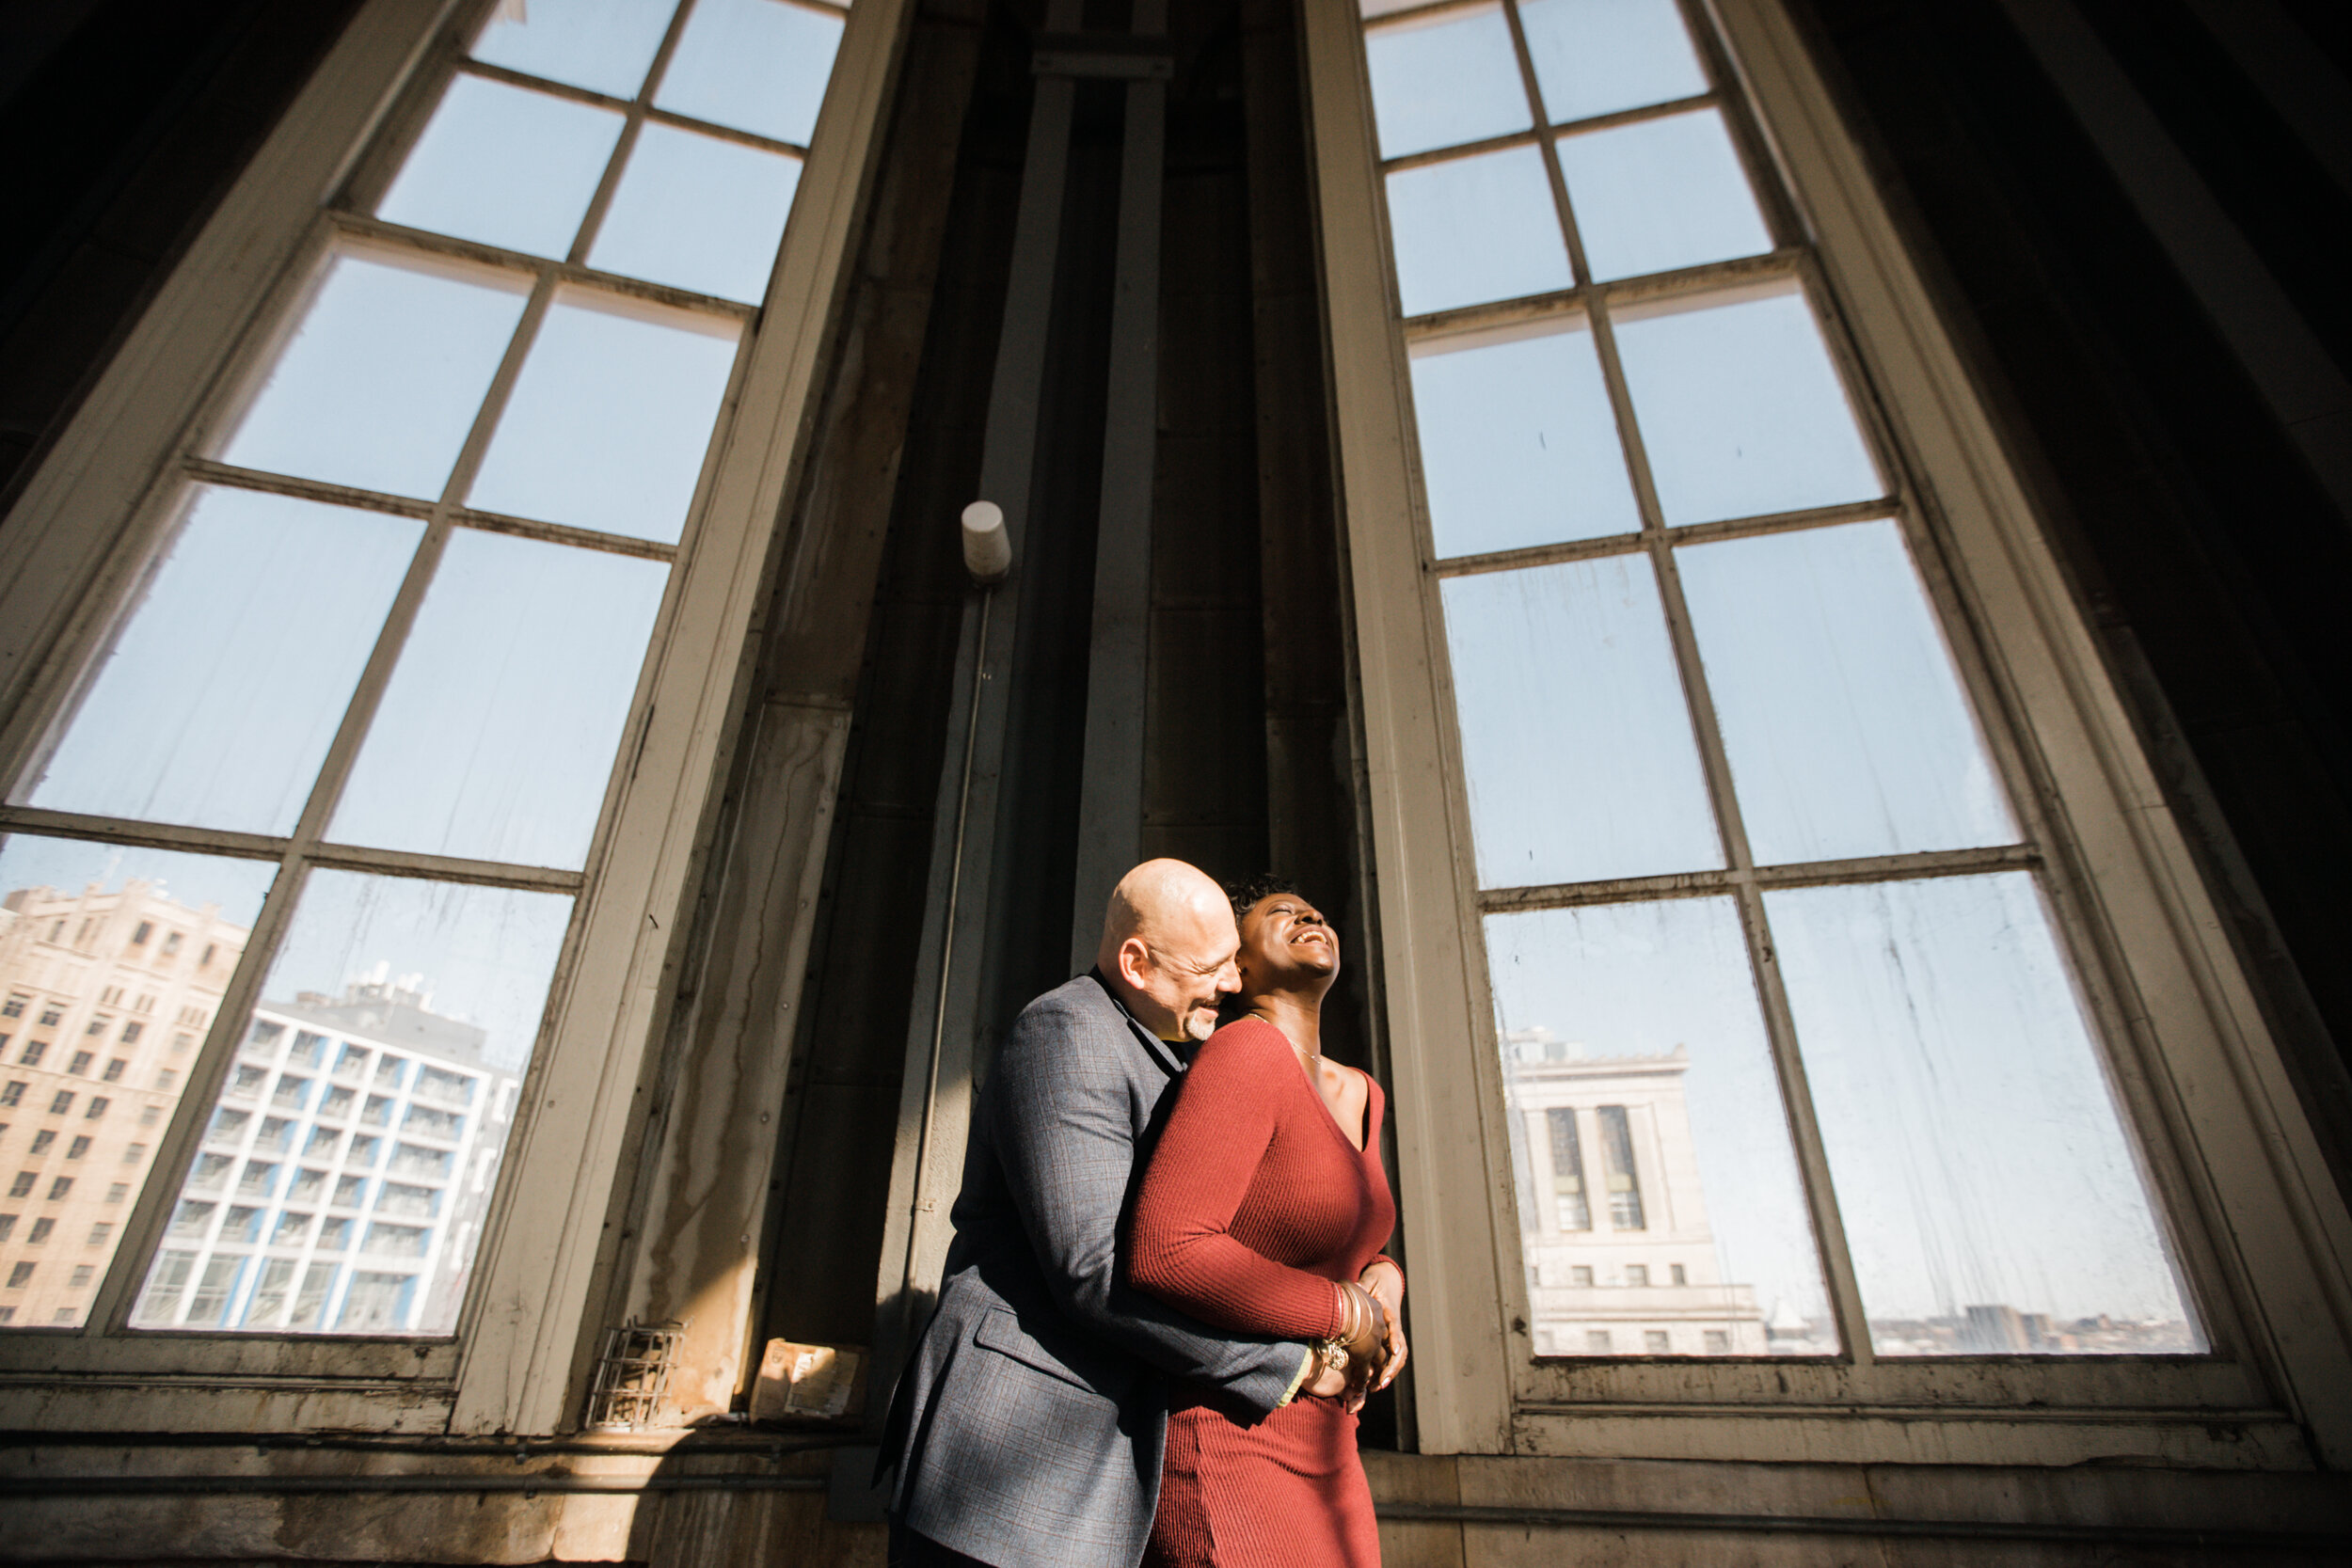 Beautiful Engagement Session at Baltimore City Hall by Baltimores Best Wedding Photographers Megapixels Media Black Wedding Photographers-37.jpg